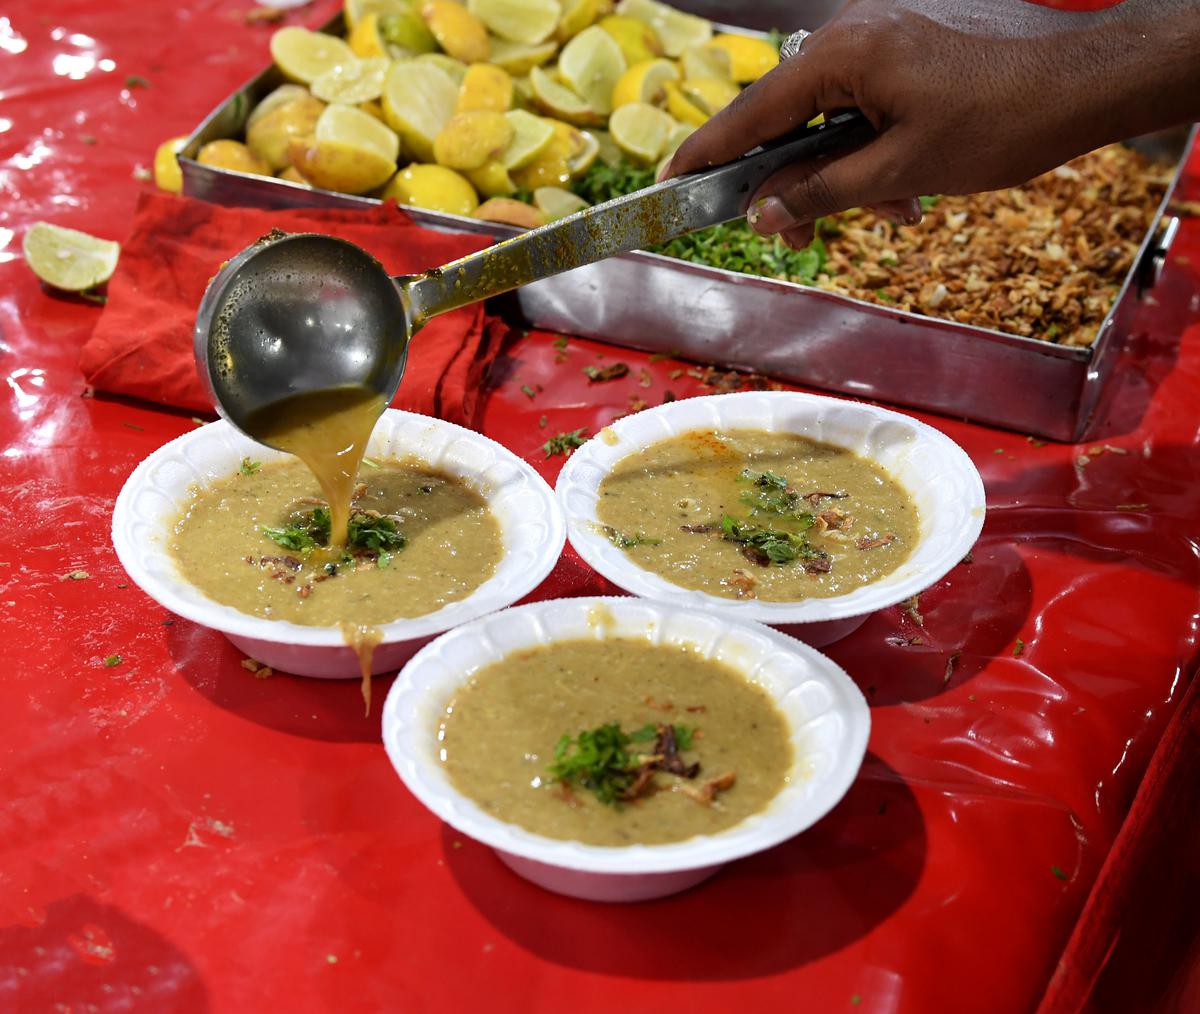 People relishing Haleem at the stall as soon as the month of Ramzan begins.